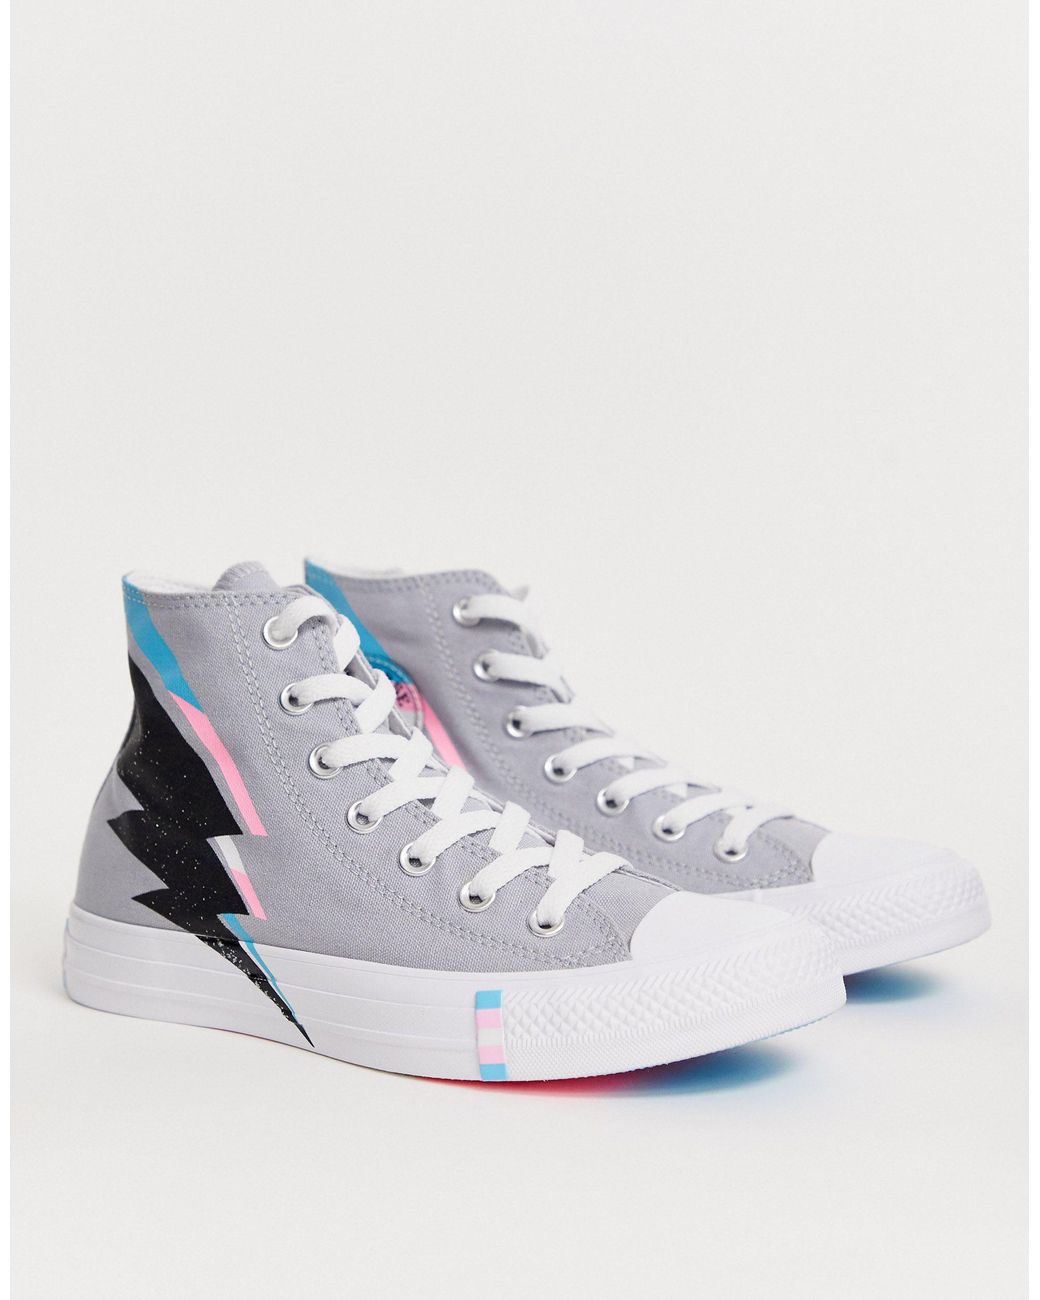 Converse Lace Pride Chuck Taylor Hi All Star Blue And Pink Lightening Bolt  Trainers in Grey | Lyst Canada